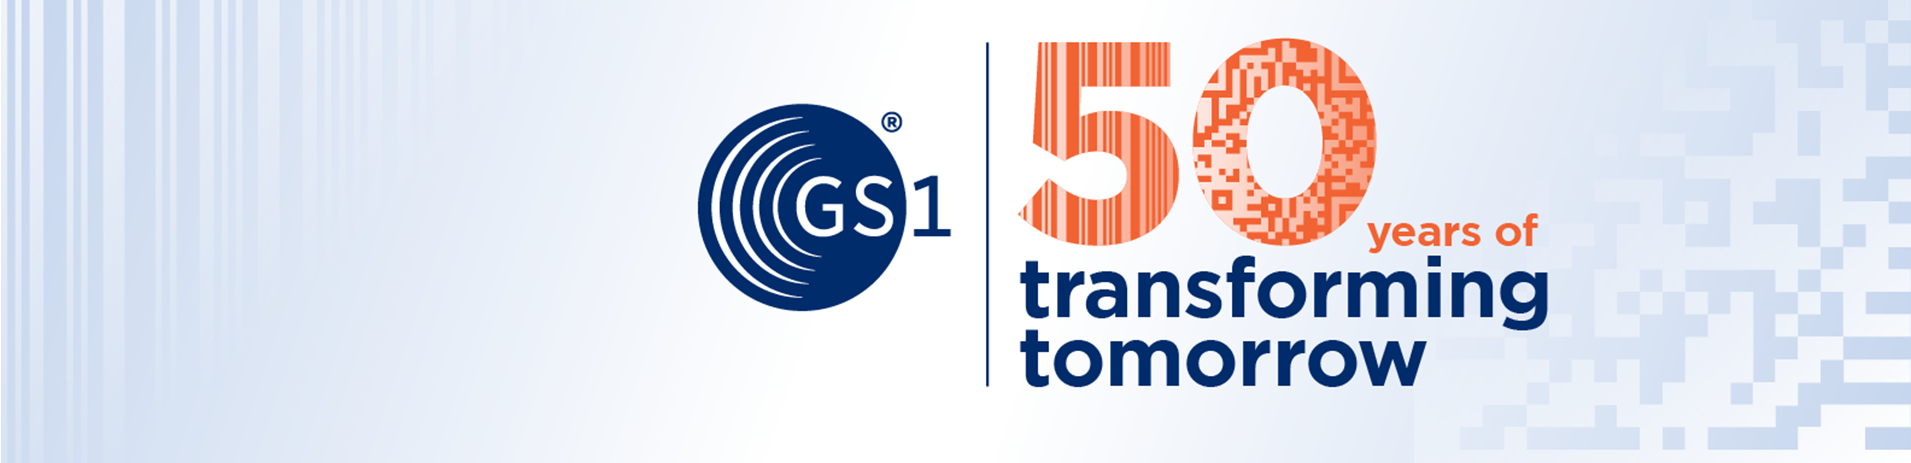 50 years of GS1